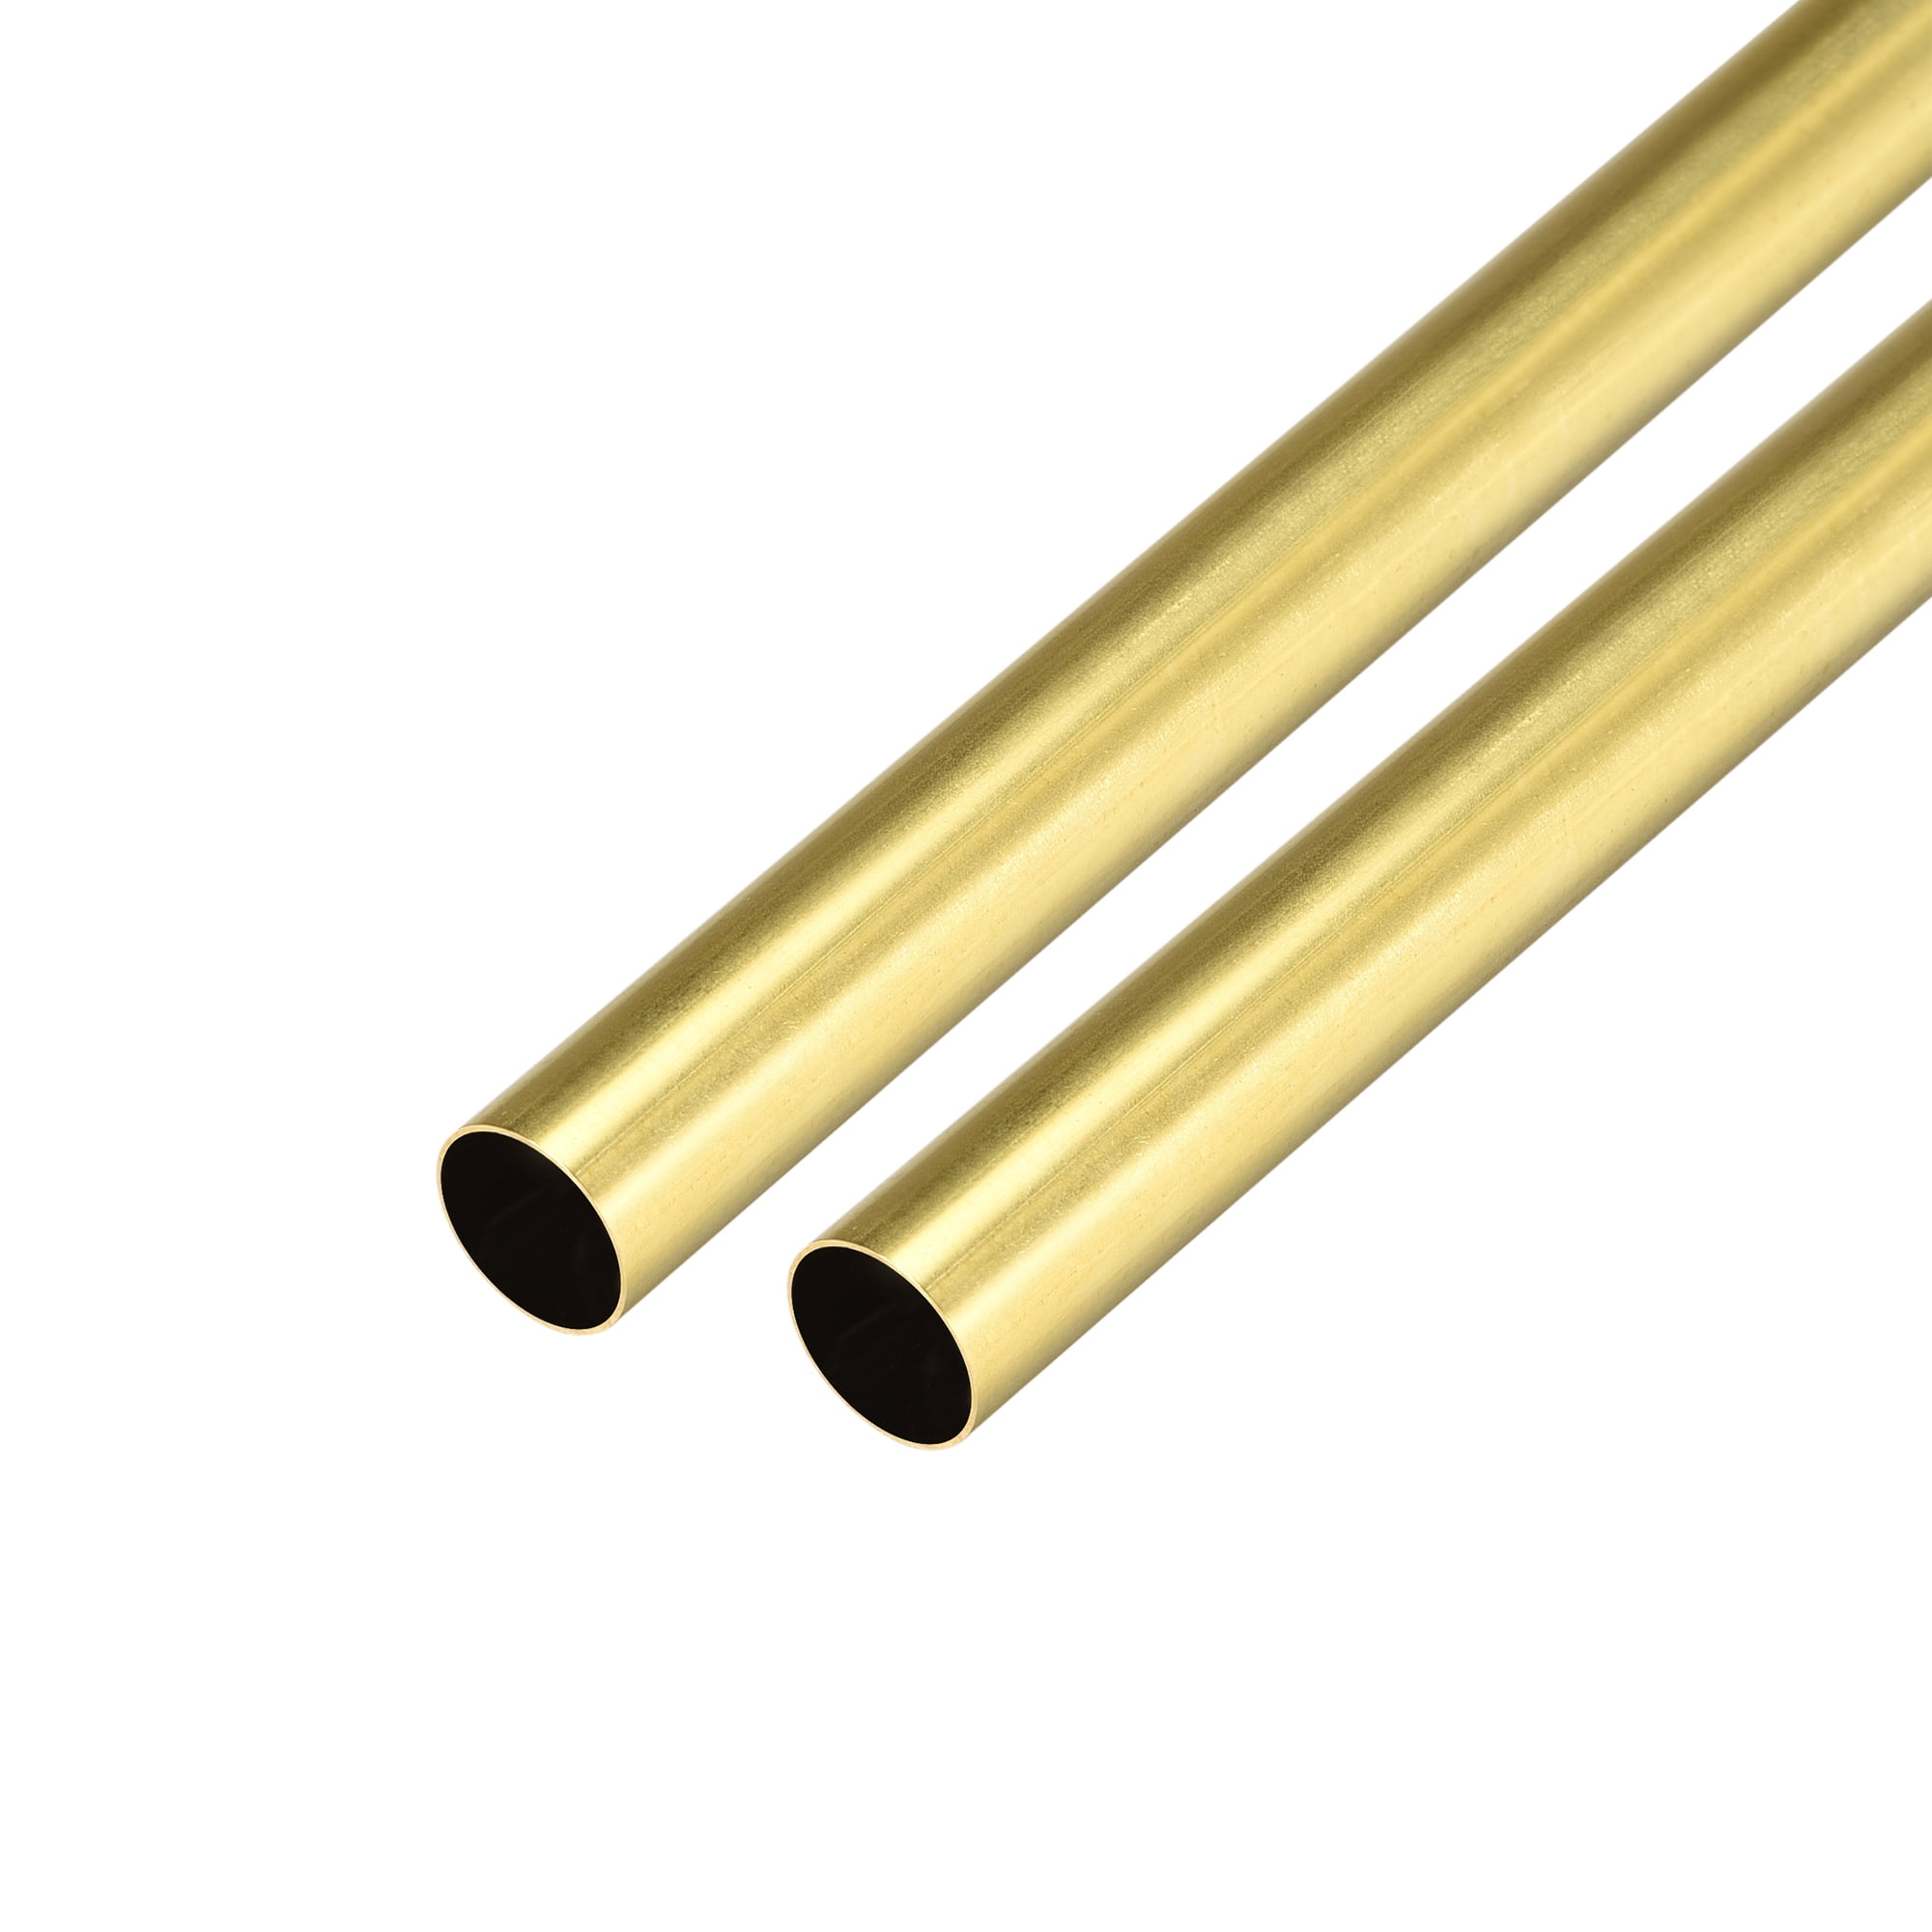 Outer Diameter 2mm Round Brass Tubes 300mm long 0.5mm Wall Project Tube Pipe 